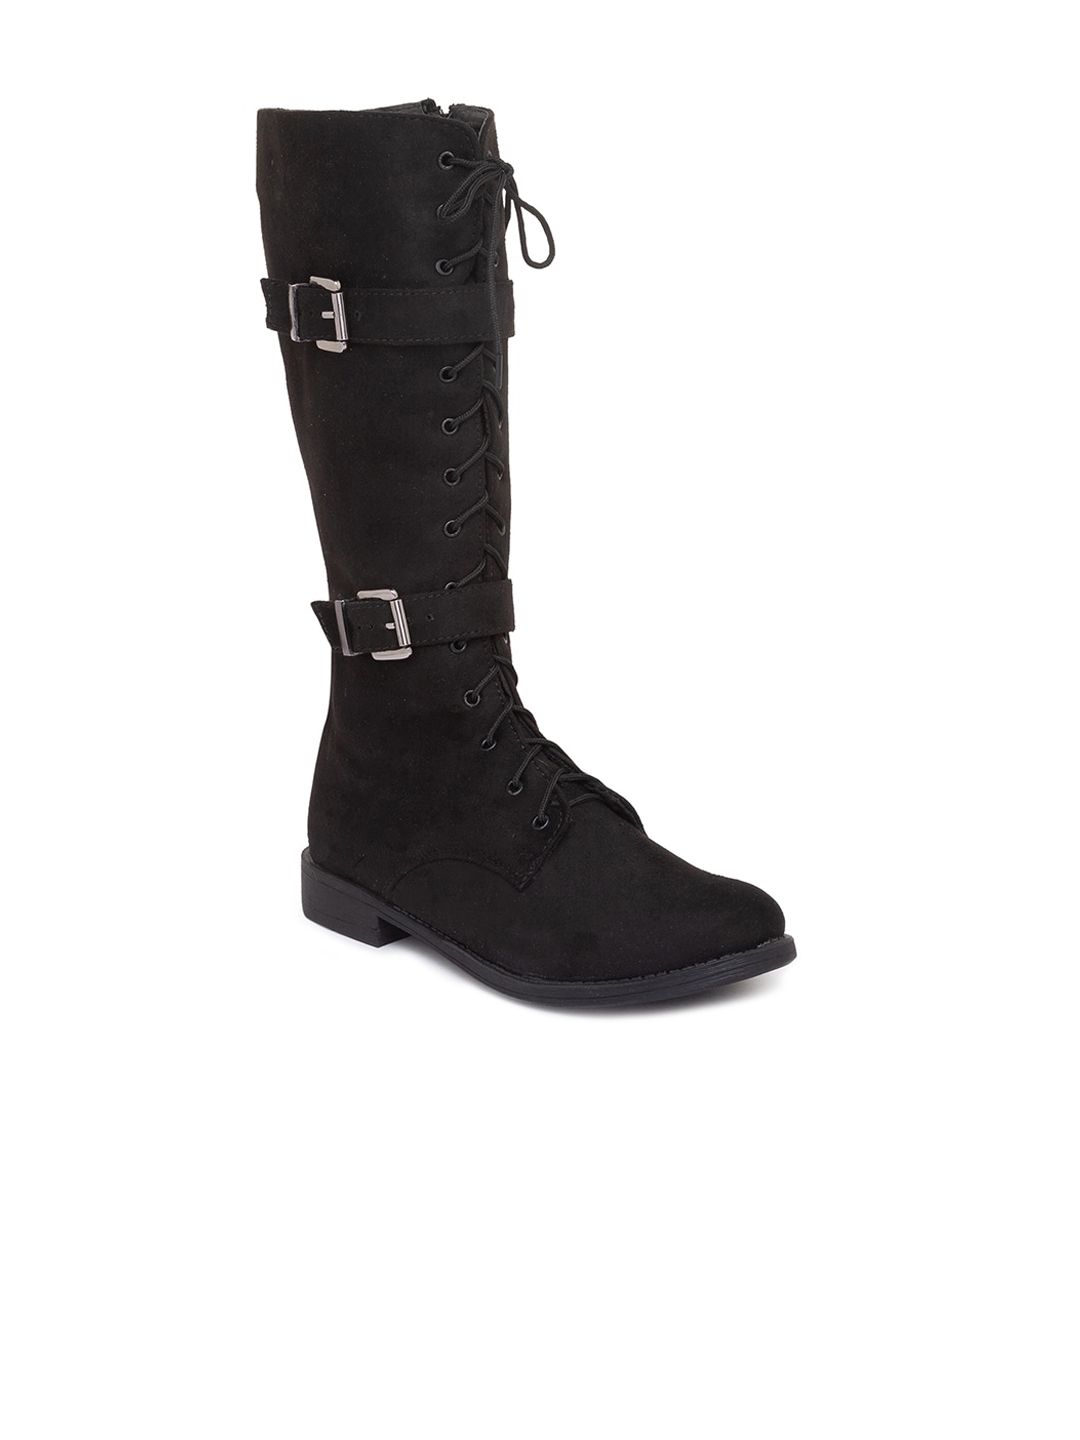 Sole To Soul Black Suede High-Top Block Heeled Boots with Buckles Price in India